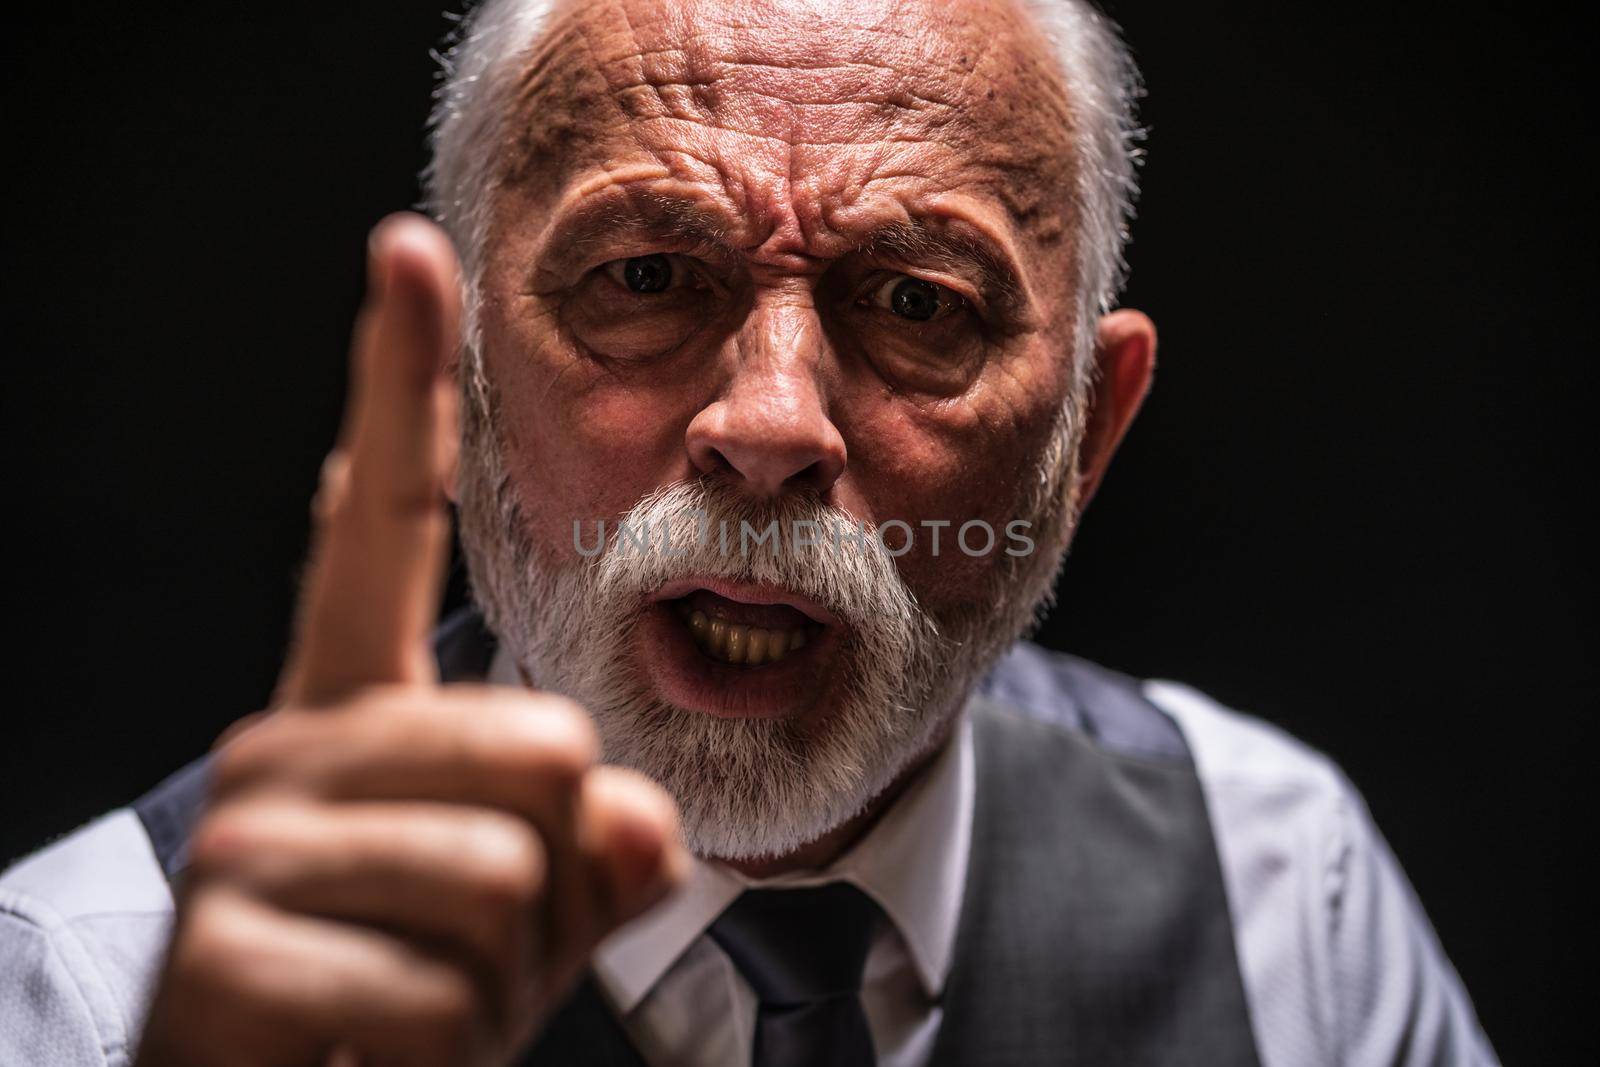 Portrait of angry senior man who threatens. Black background.